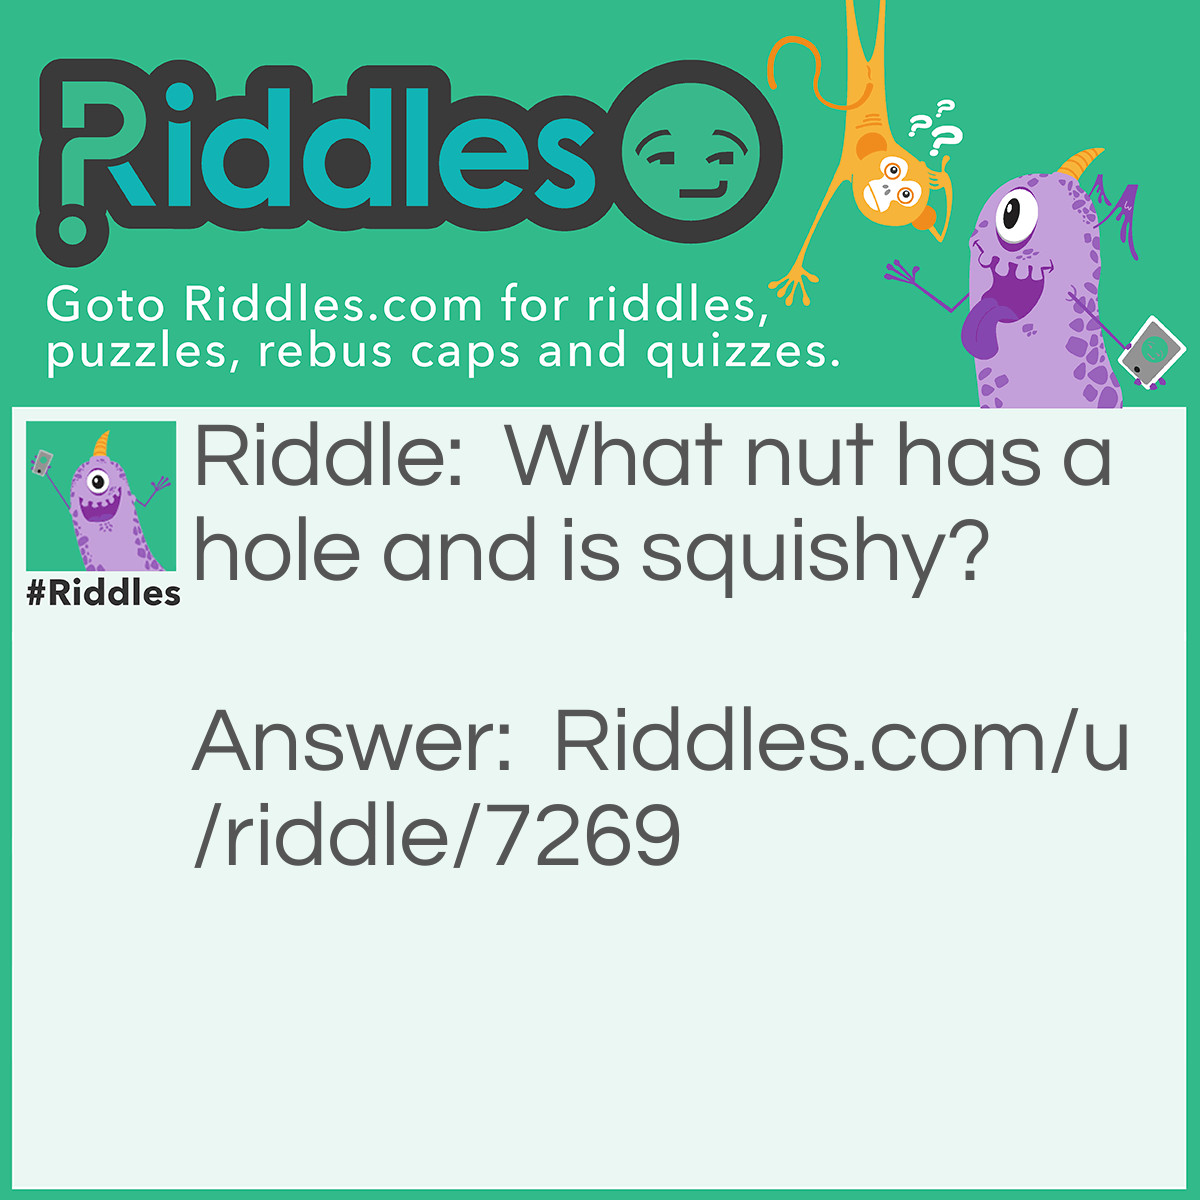 Riddle: What nut has a hole and is squishy? Answer: Doughnut